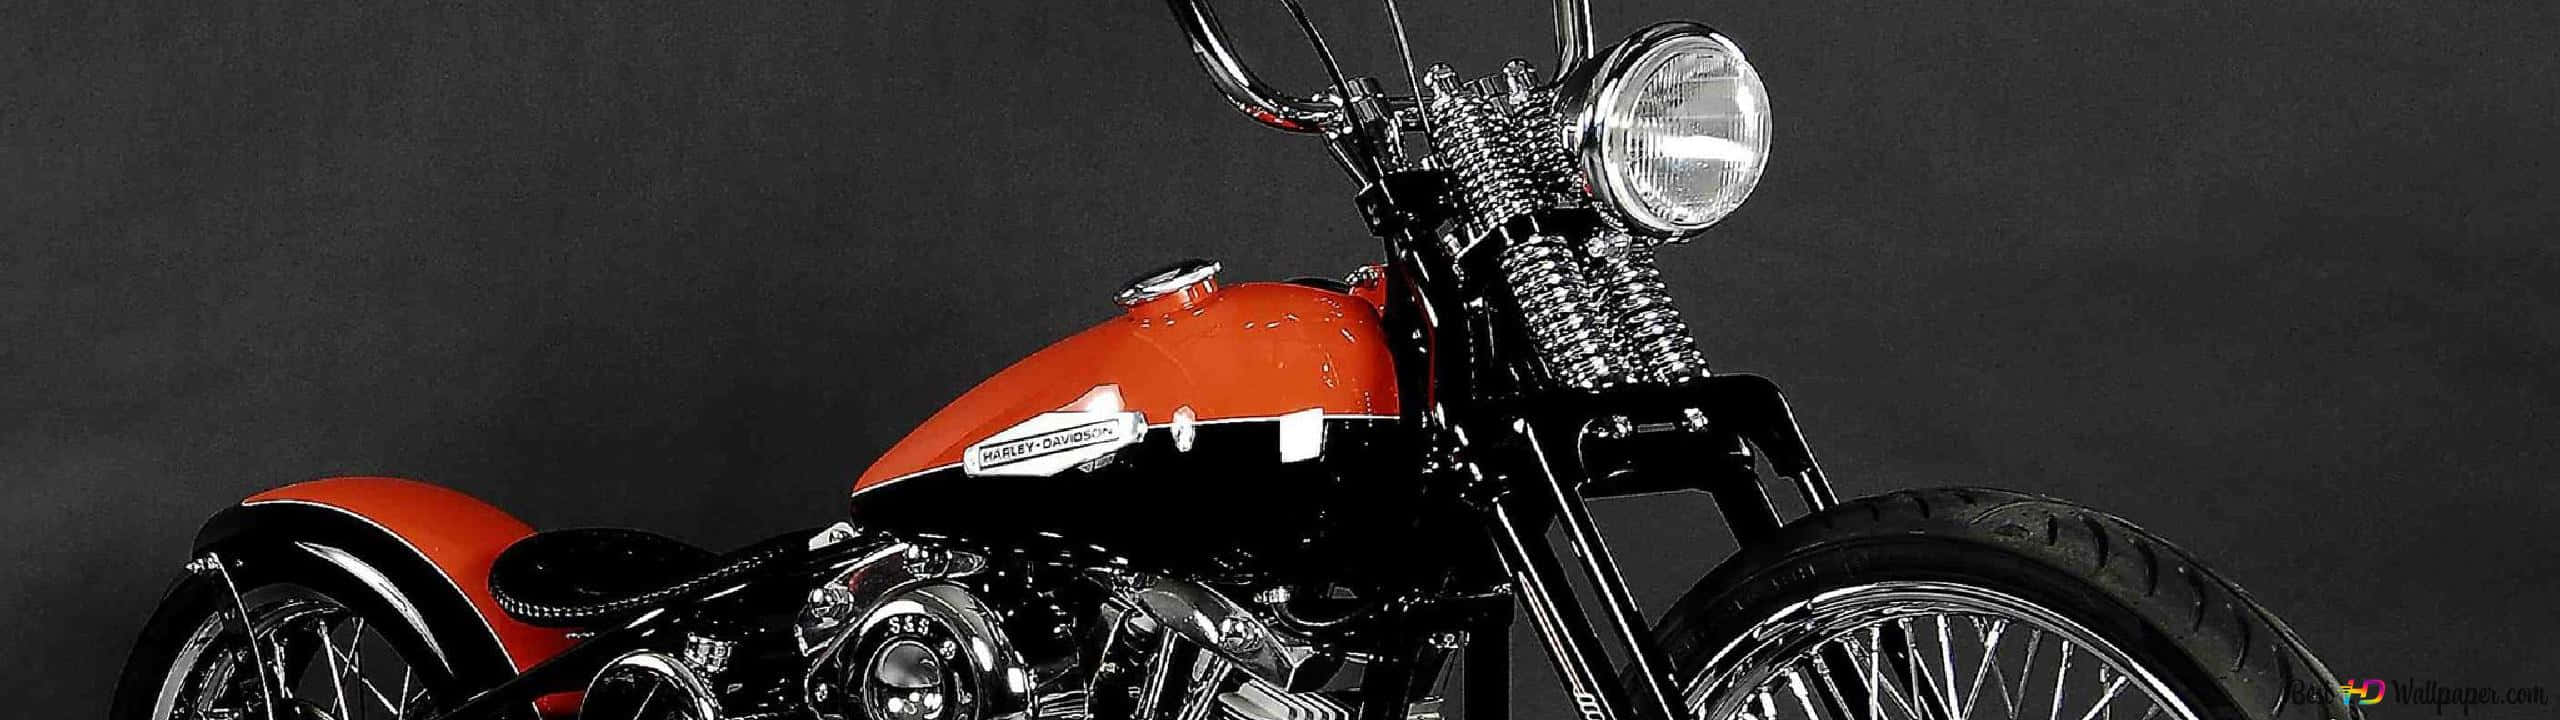 A majestic Harley-Davidson HD motorcycle parked on the street Wallpaper